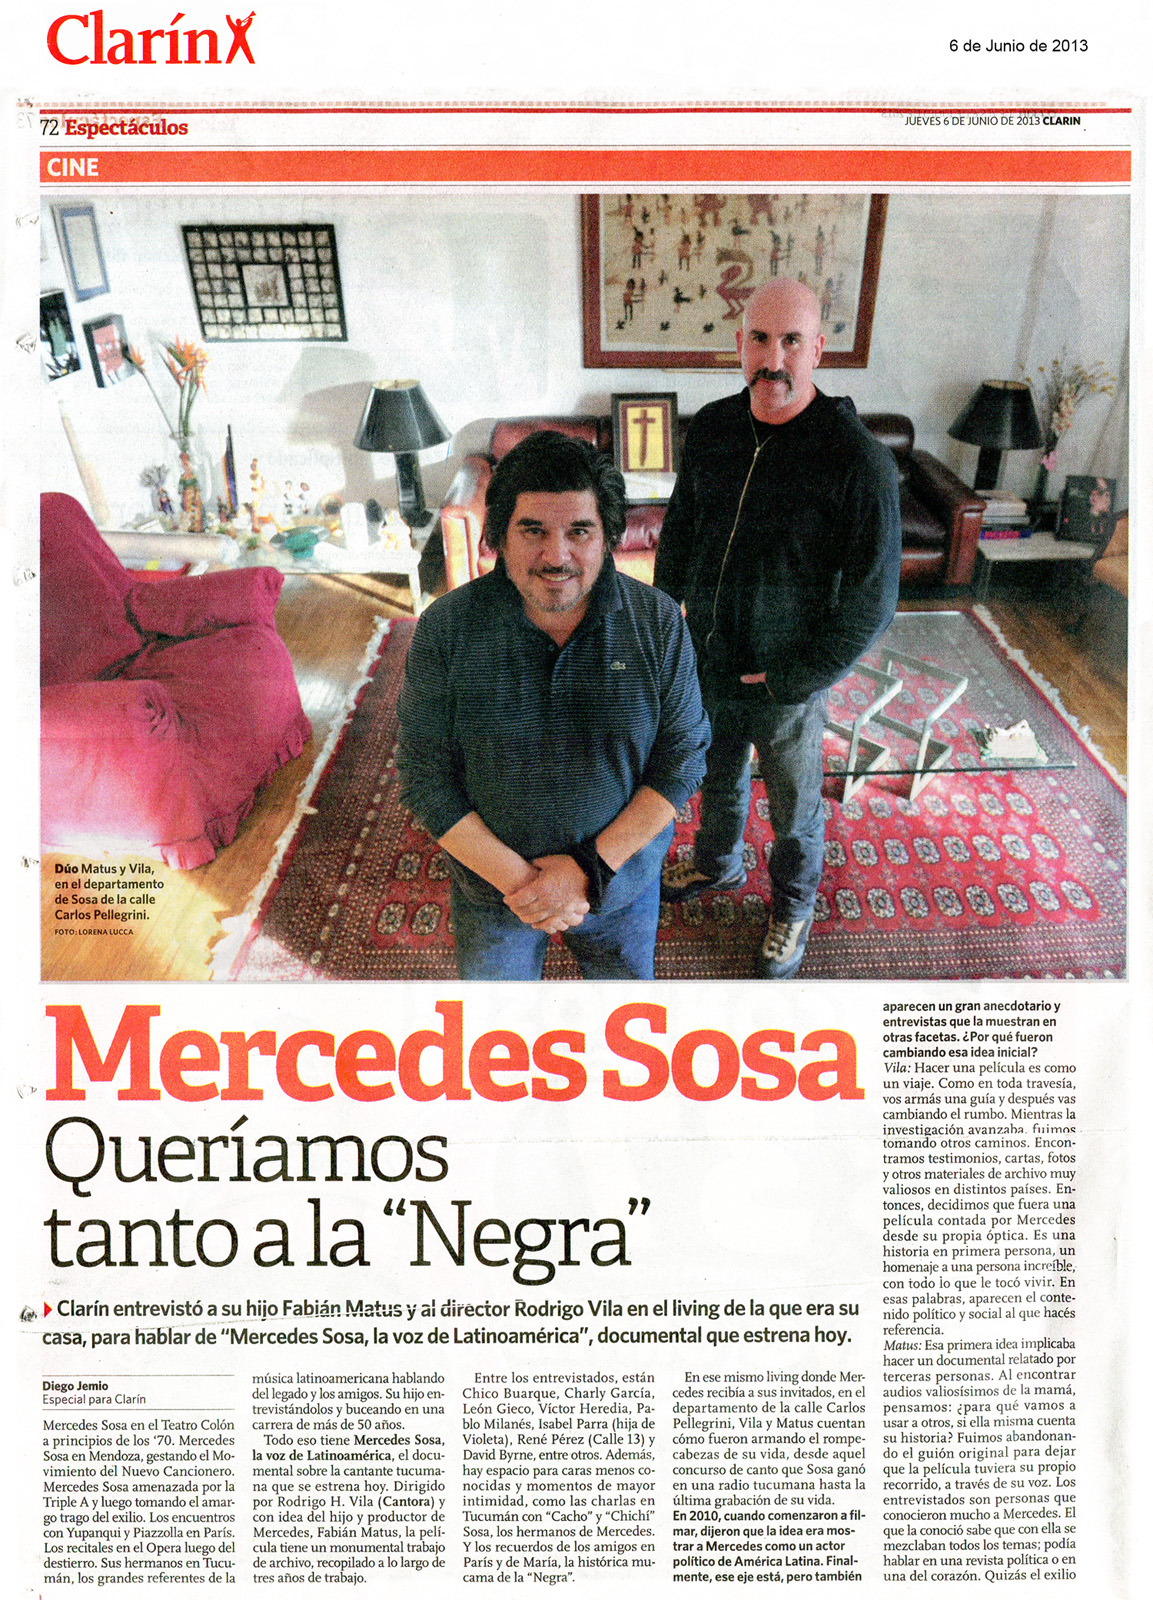 Biggest Newspaper in Argentina. Entertainment cover page.